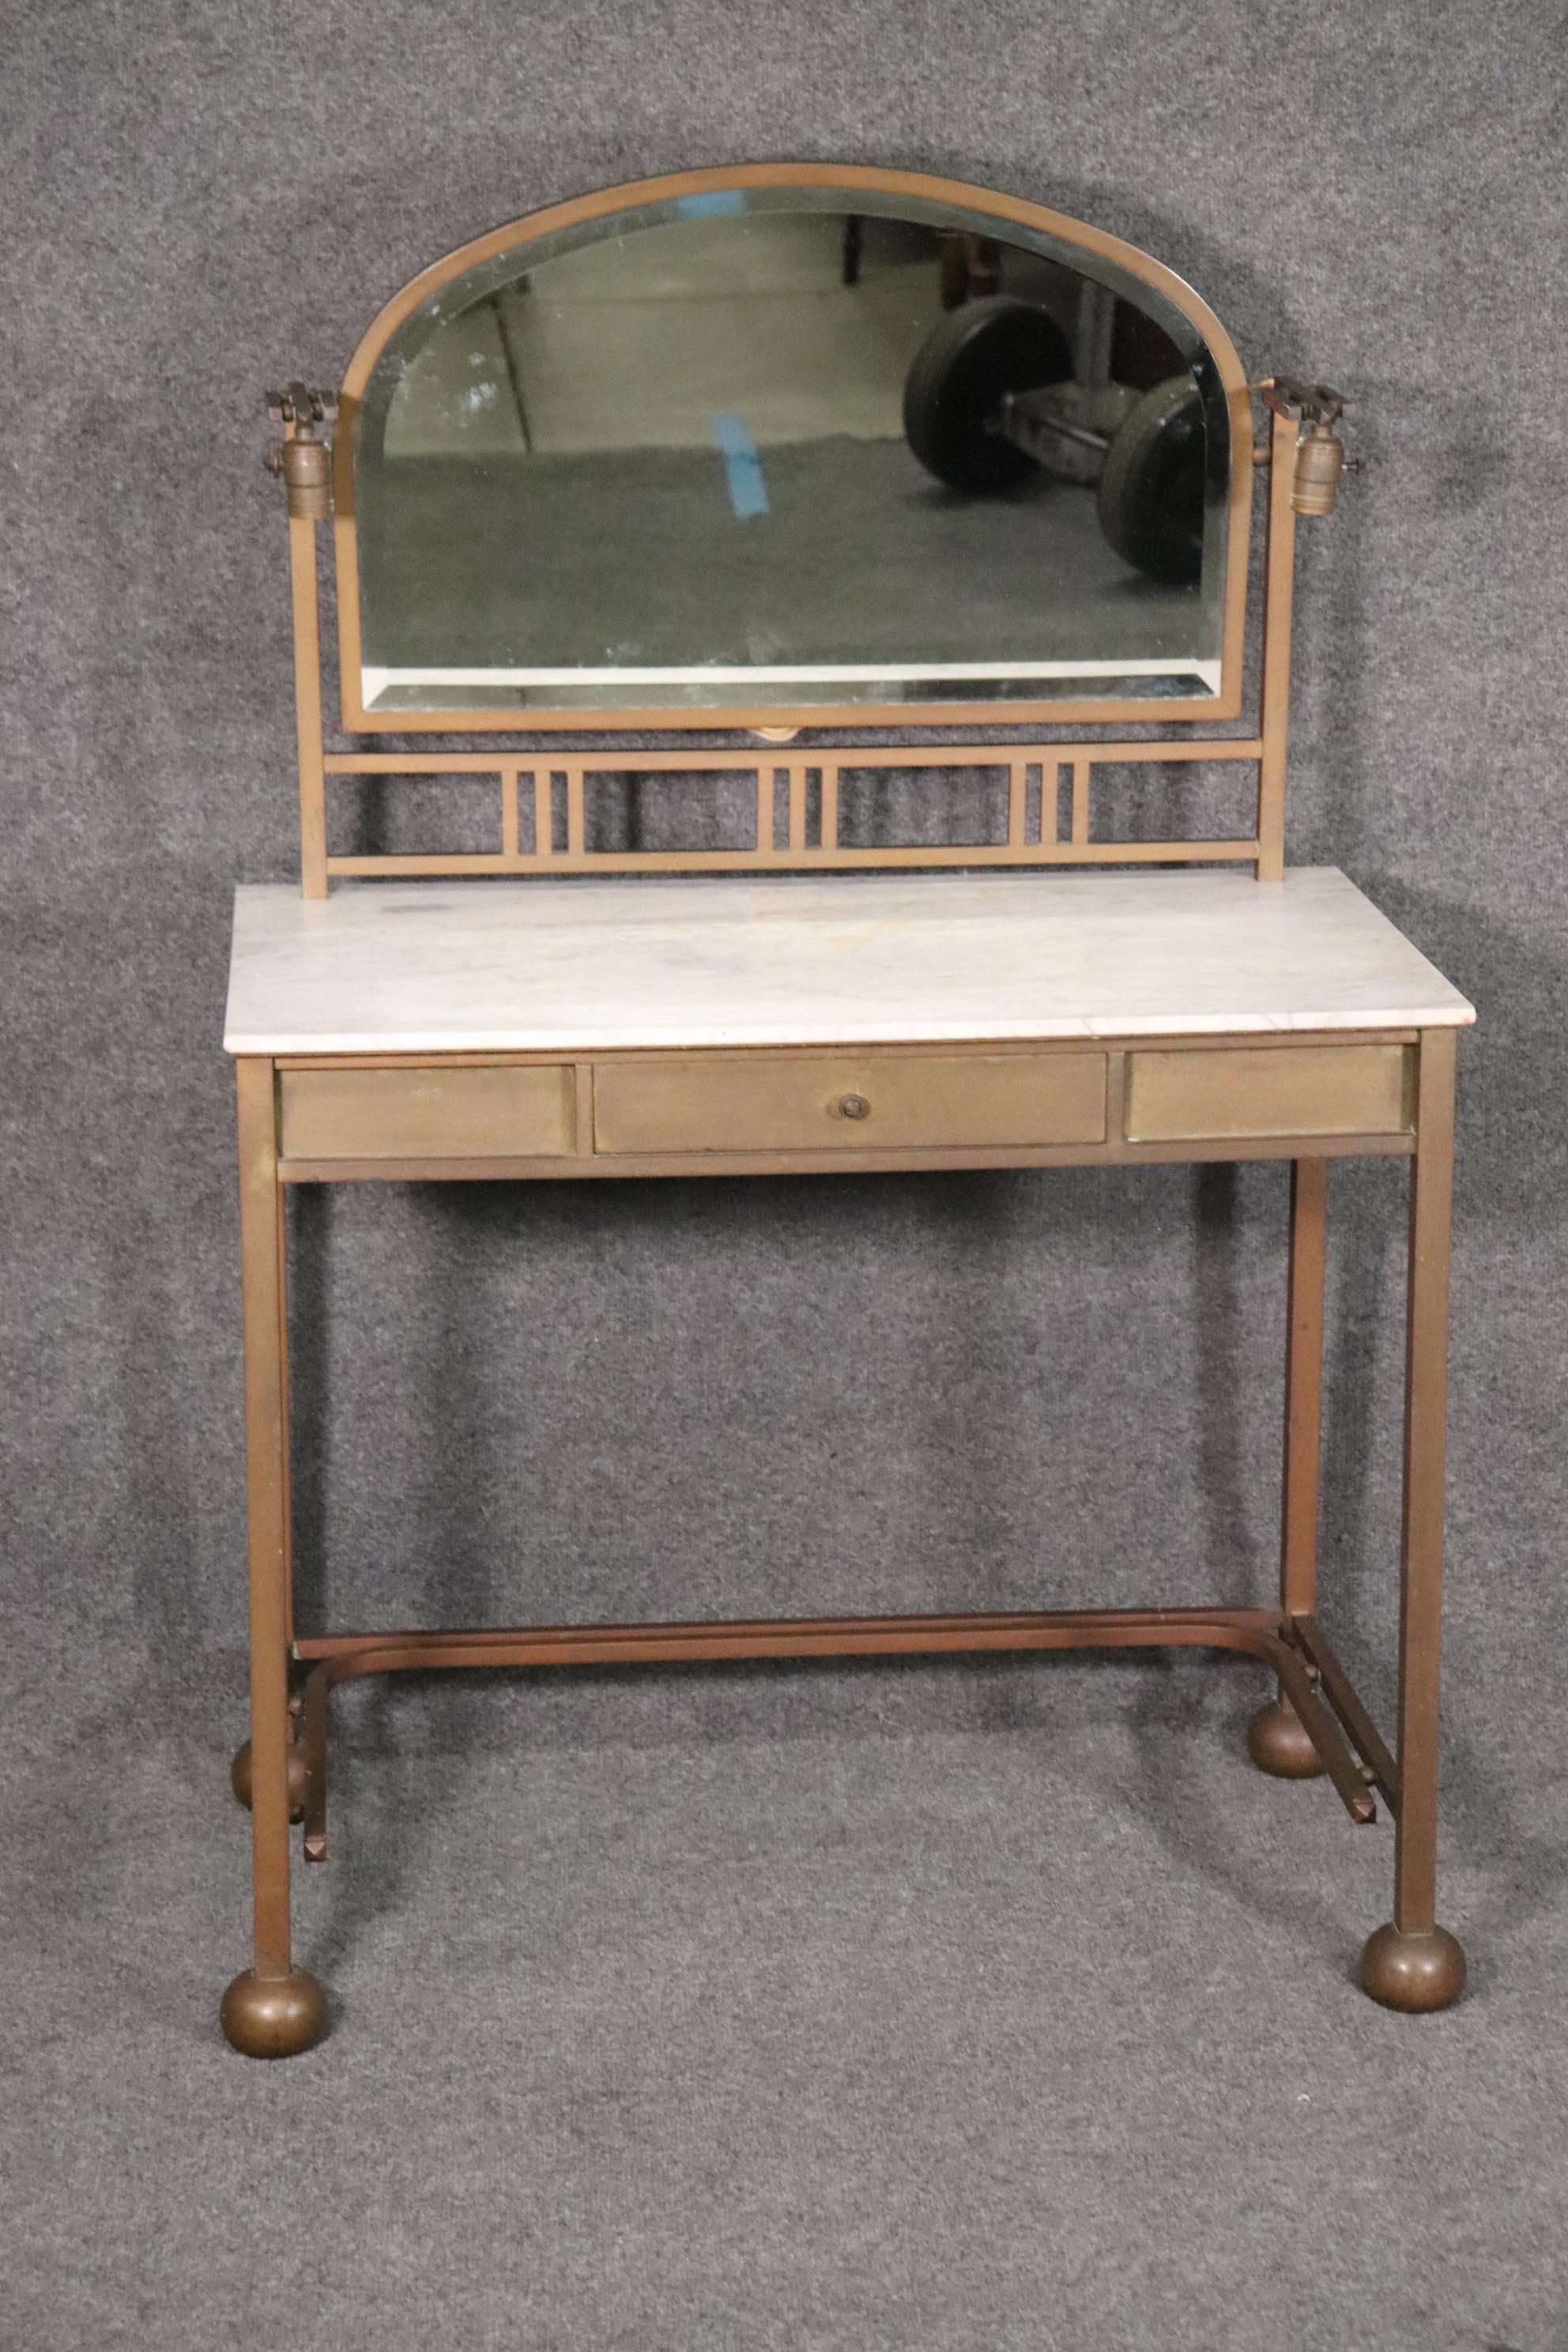 Dimensions: H: 50in W: 34 3/4in in D: 20 1/4in
This is an exceptional piece made by Pardon. They were in business from the late 19th century to the early 20th century. If you look closely you can see the entire vanity is made from bronze and